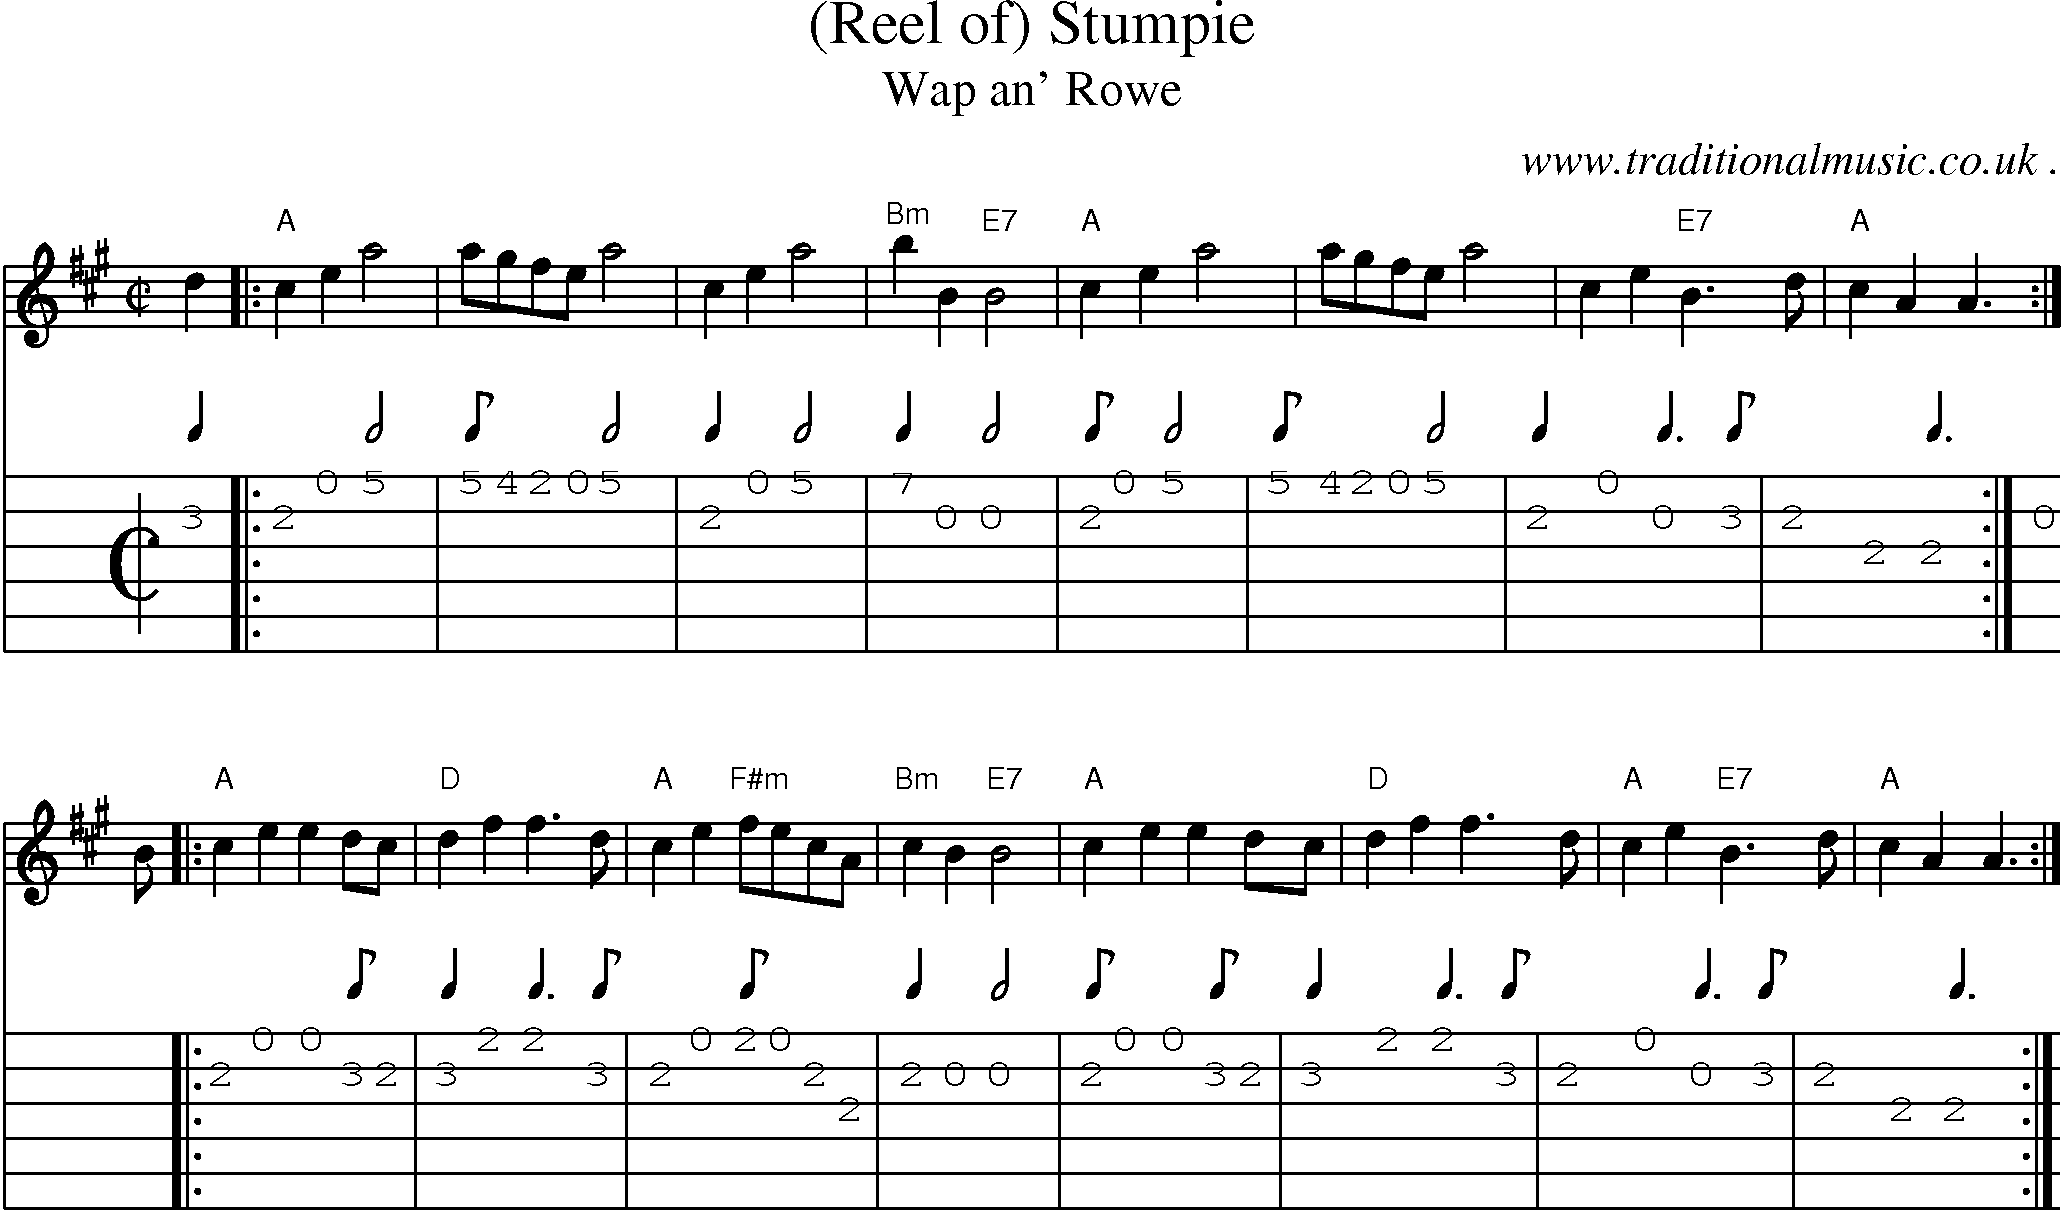 Sheet-music  score, Chords and Guitar Tabs for Reel Of Stumpie